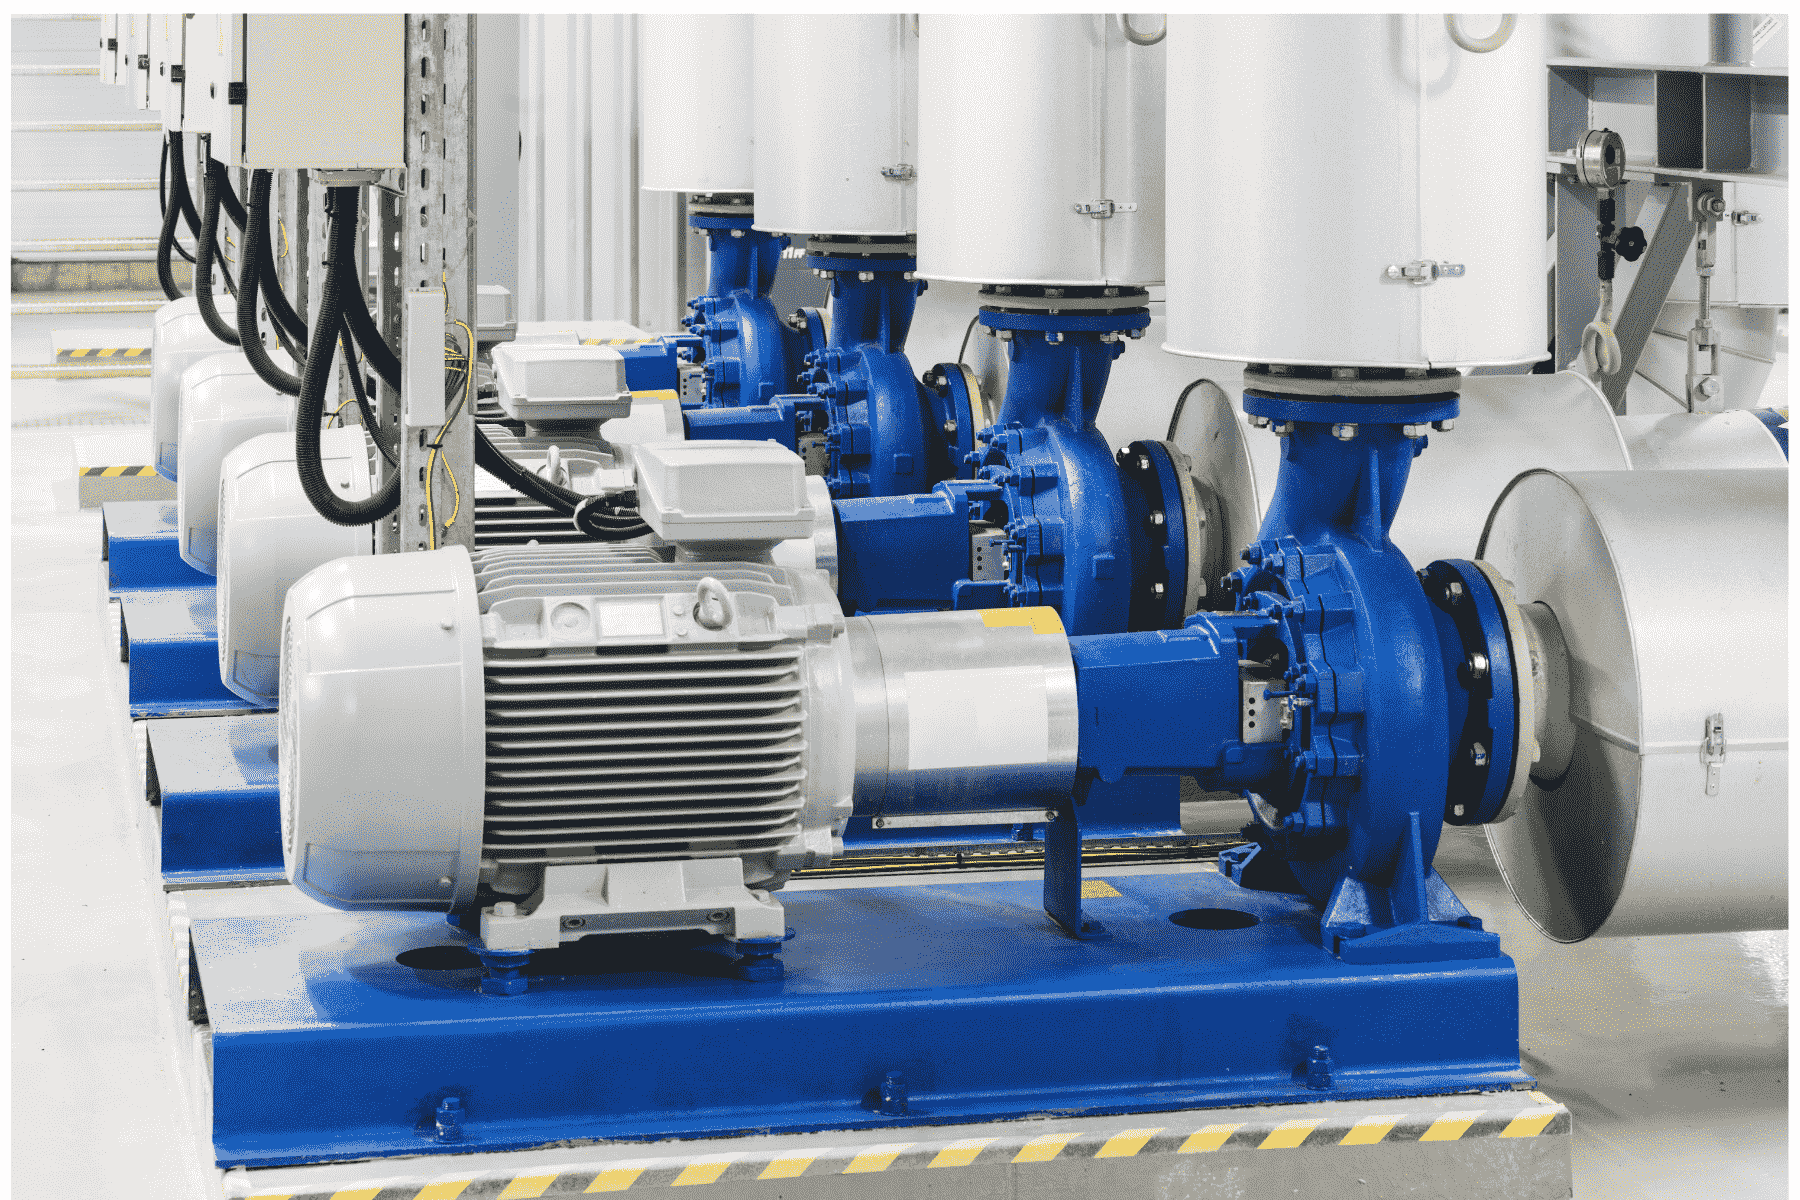 Industrial Pumping Equipment Services